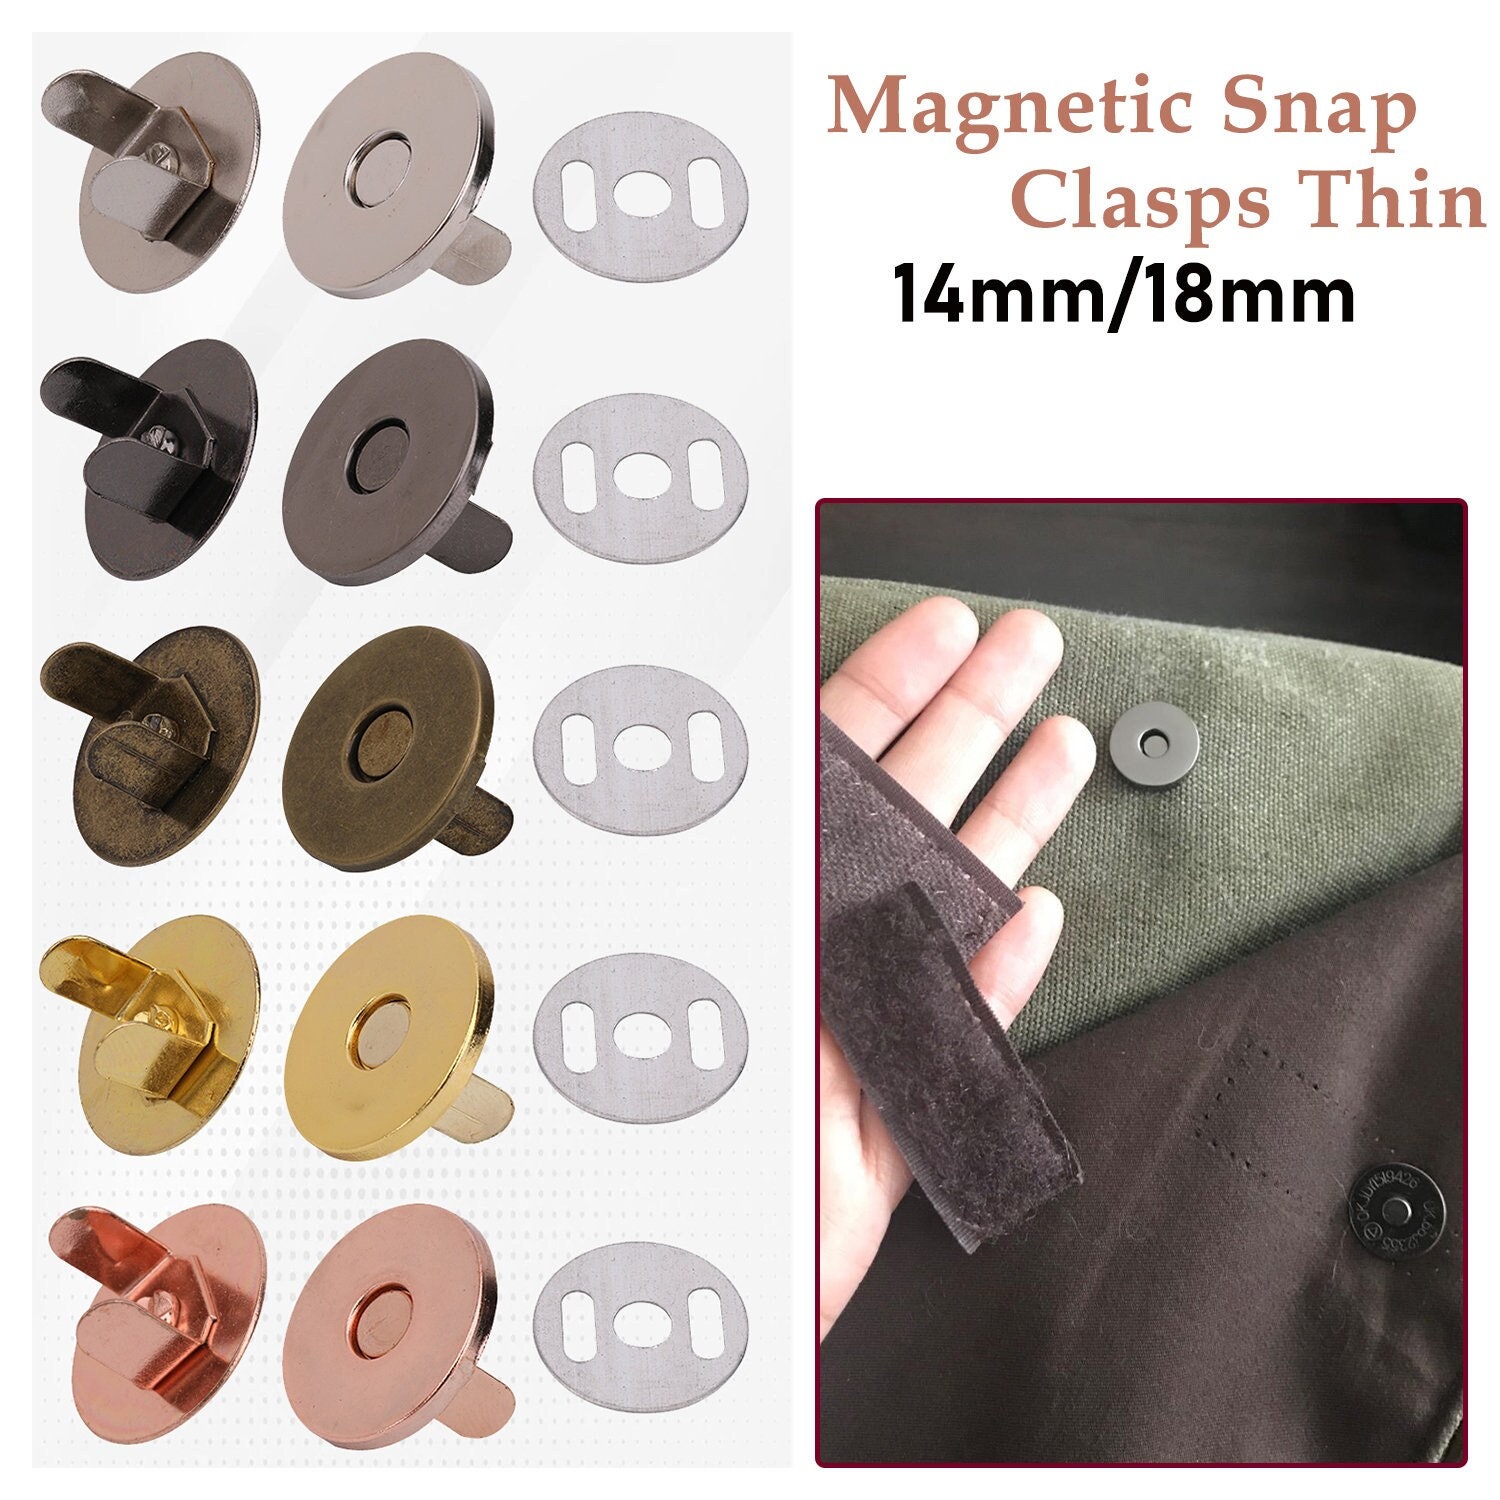 Magnetic Strips 25mm X 150mm by the Magnet Shop Sticky Magnet Pairs for  Catches, Latches, Clasps, Seals and Crafts. 